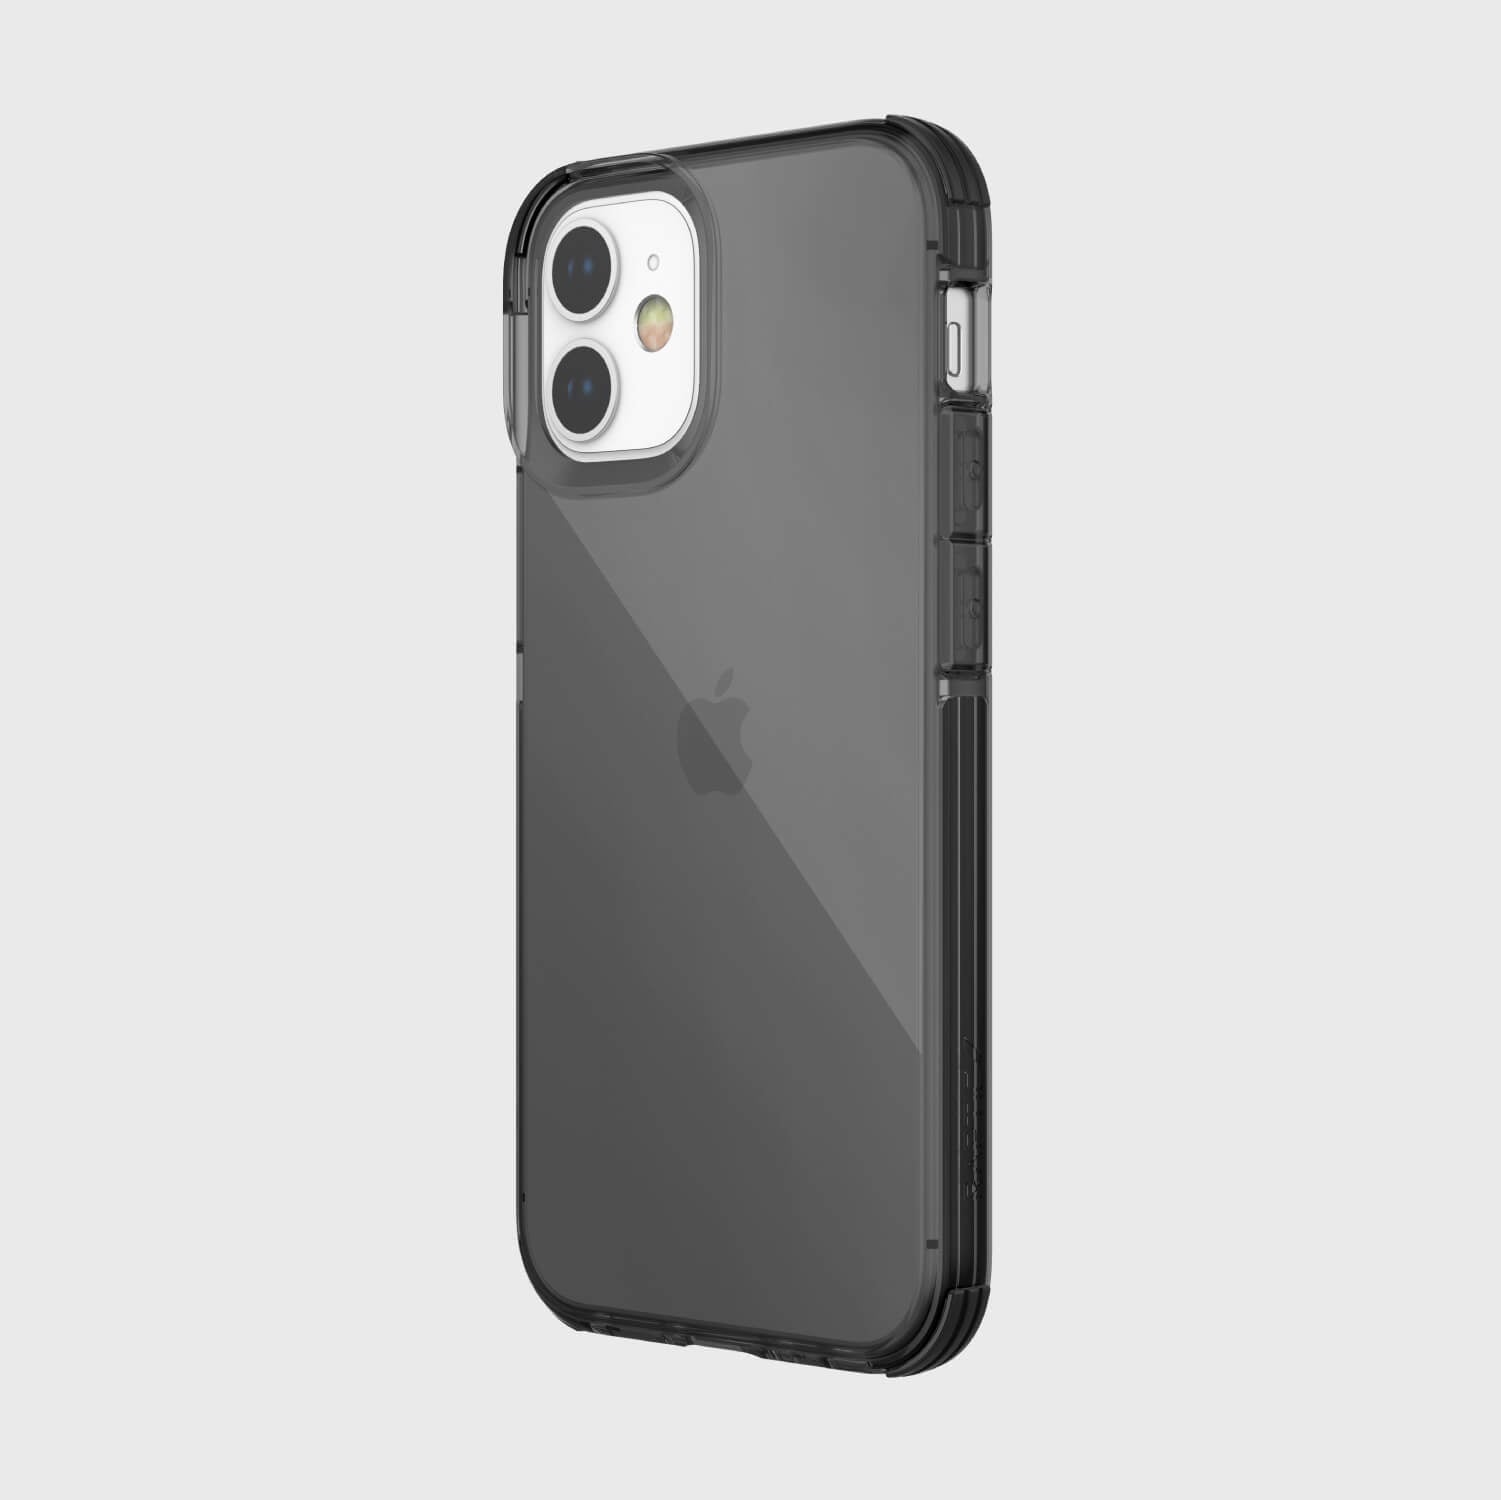 A Raptic iPhone 12 Pro Max Case - CLEAR providing drop protection for an iPhone 11.